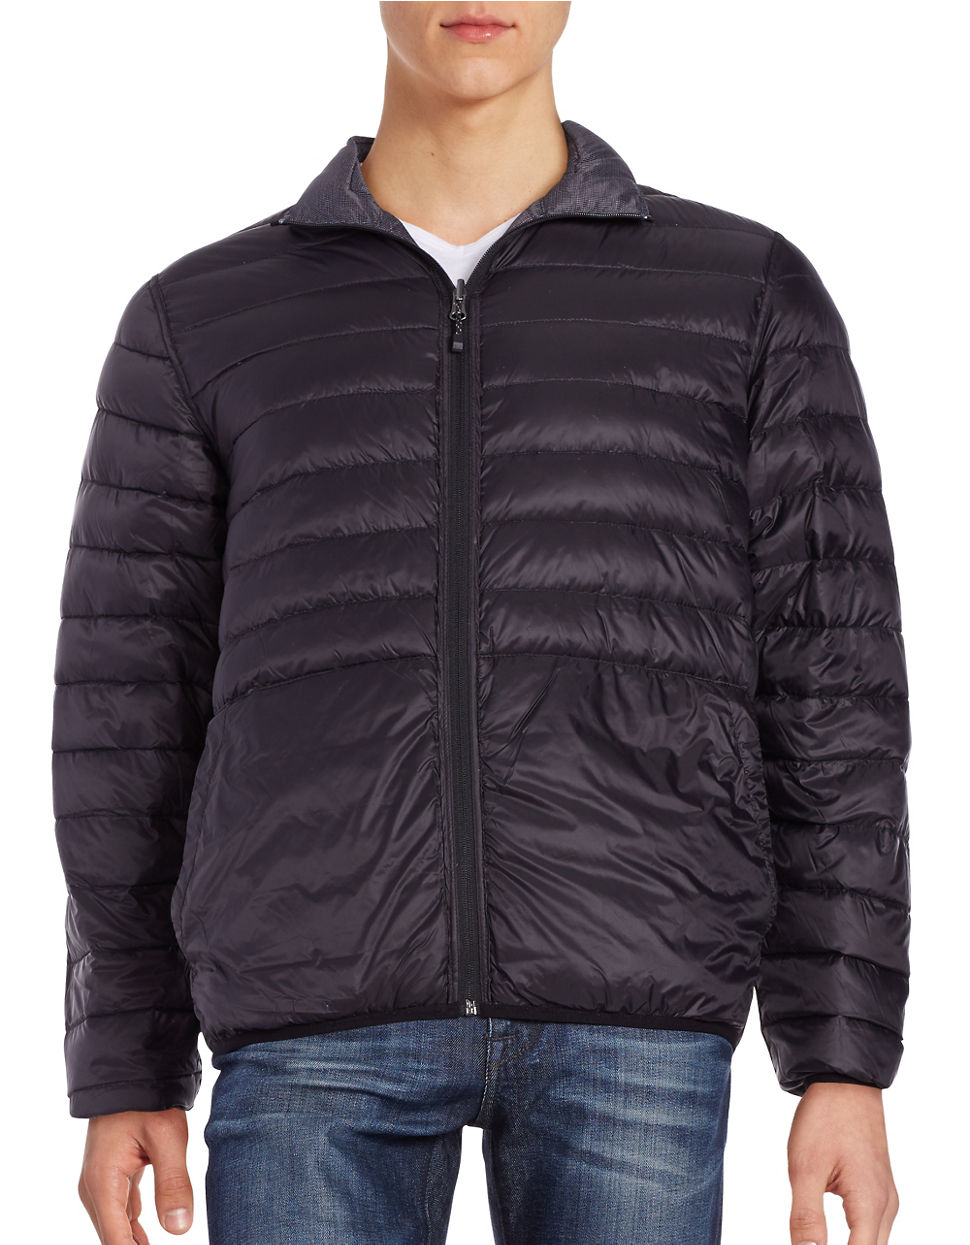 Lyst - Hawke & Co. Packable Down Puffer Jacket for Men